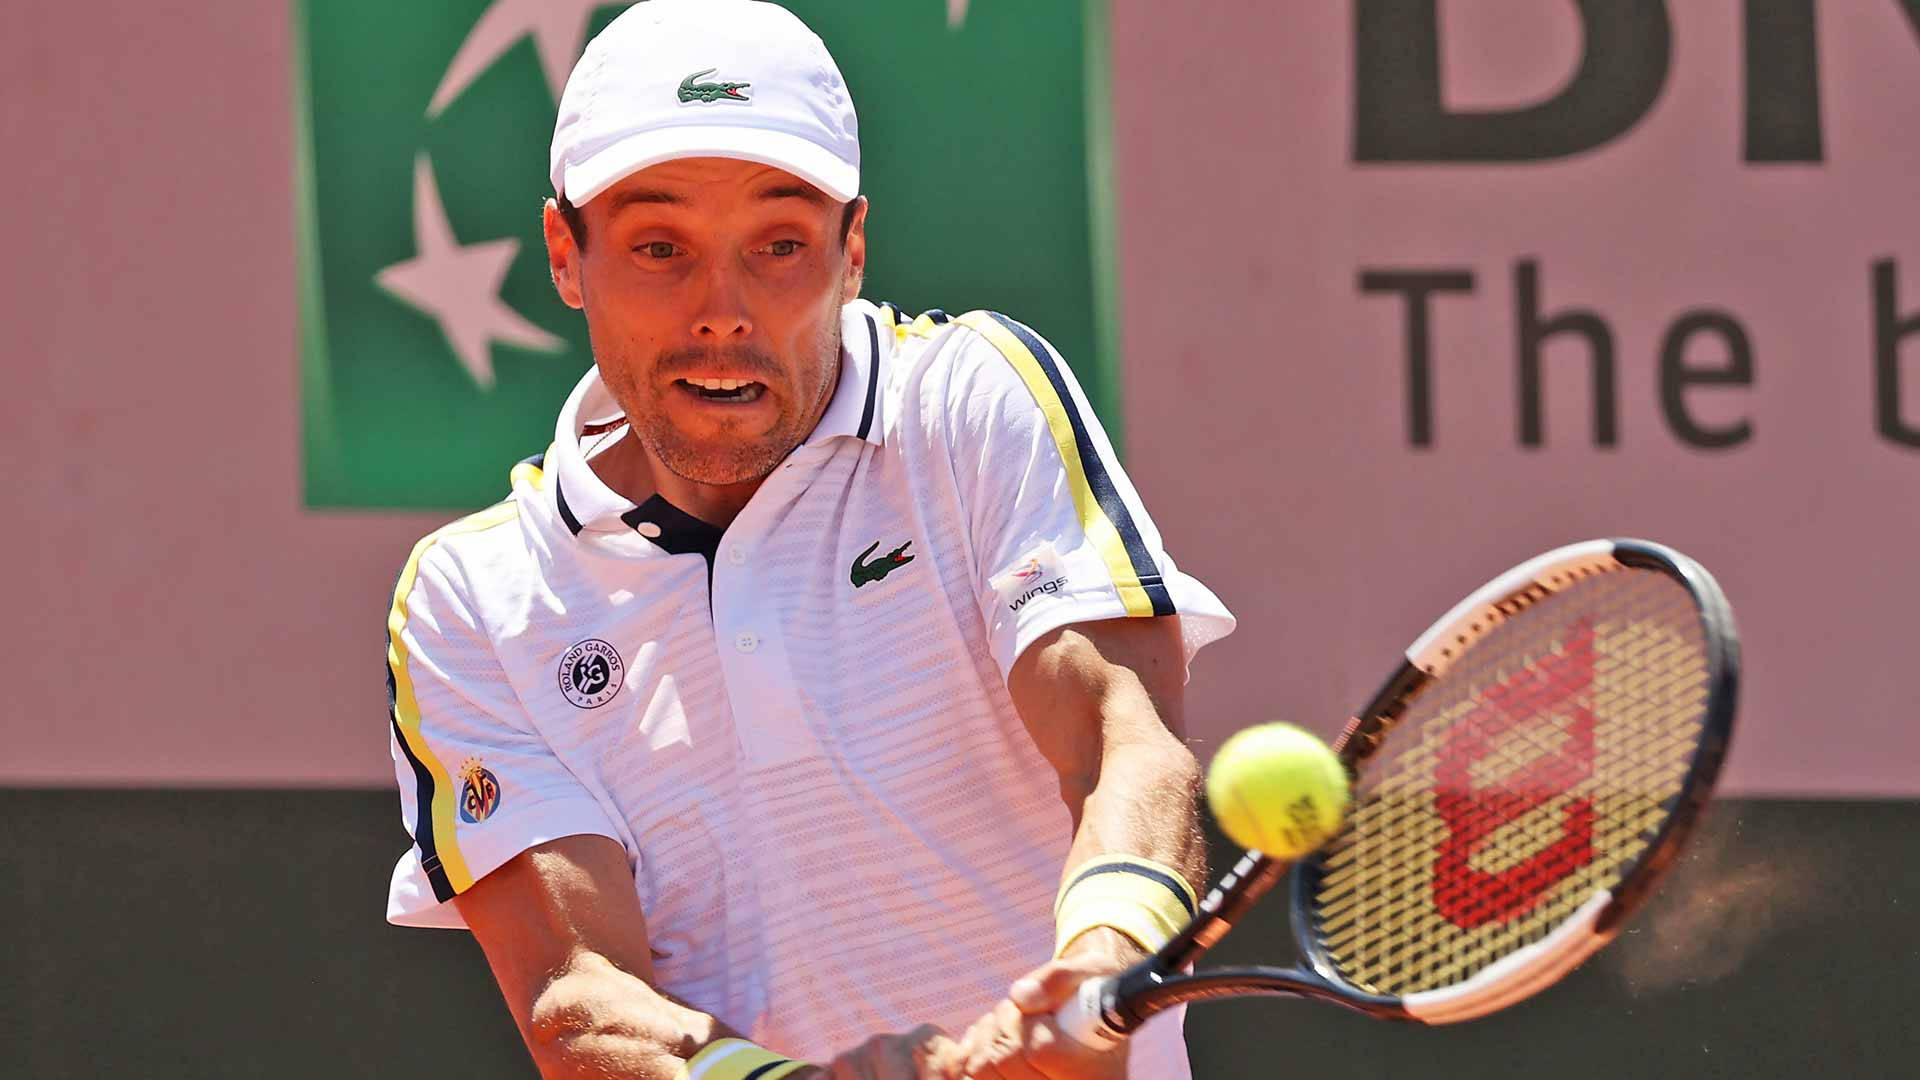 Roberto Bautista Agut intensely engaged in a challenging tennis match Wallpaper